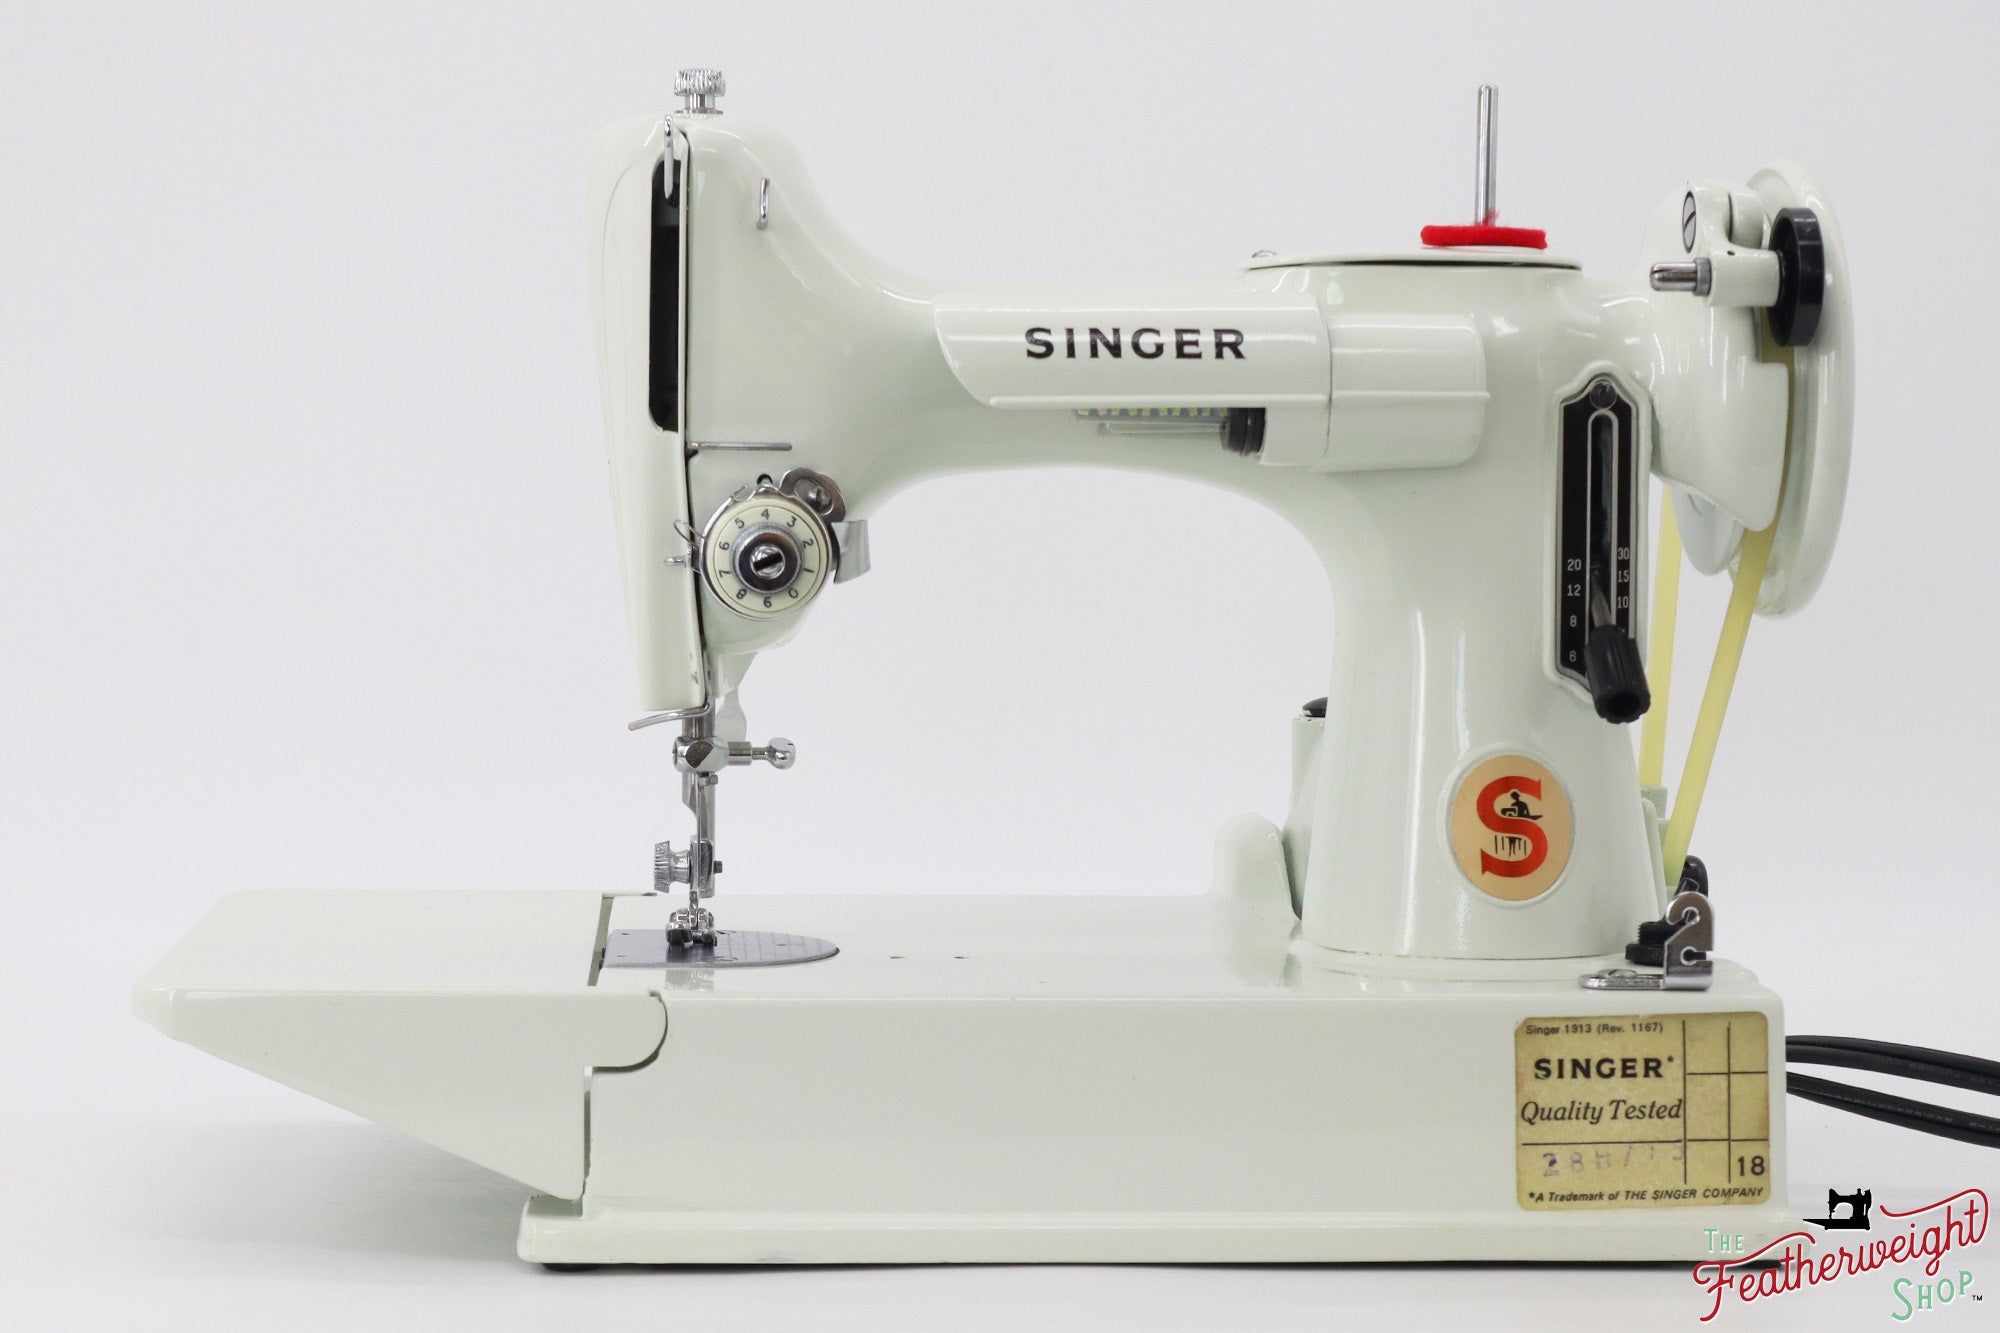 Singer Featherweight 221 Case Tote Pattern – The Singer Featherweight Shop